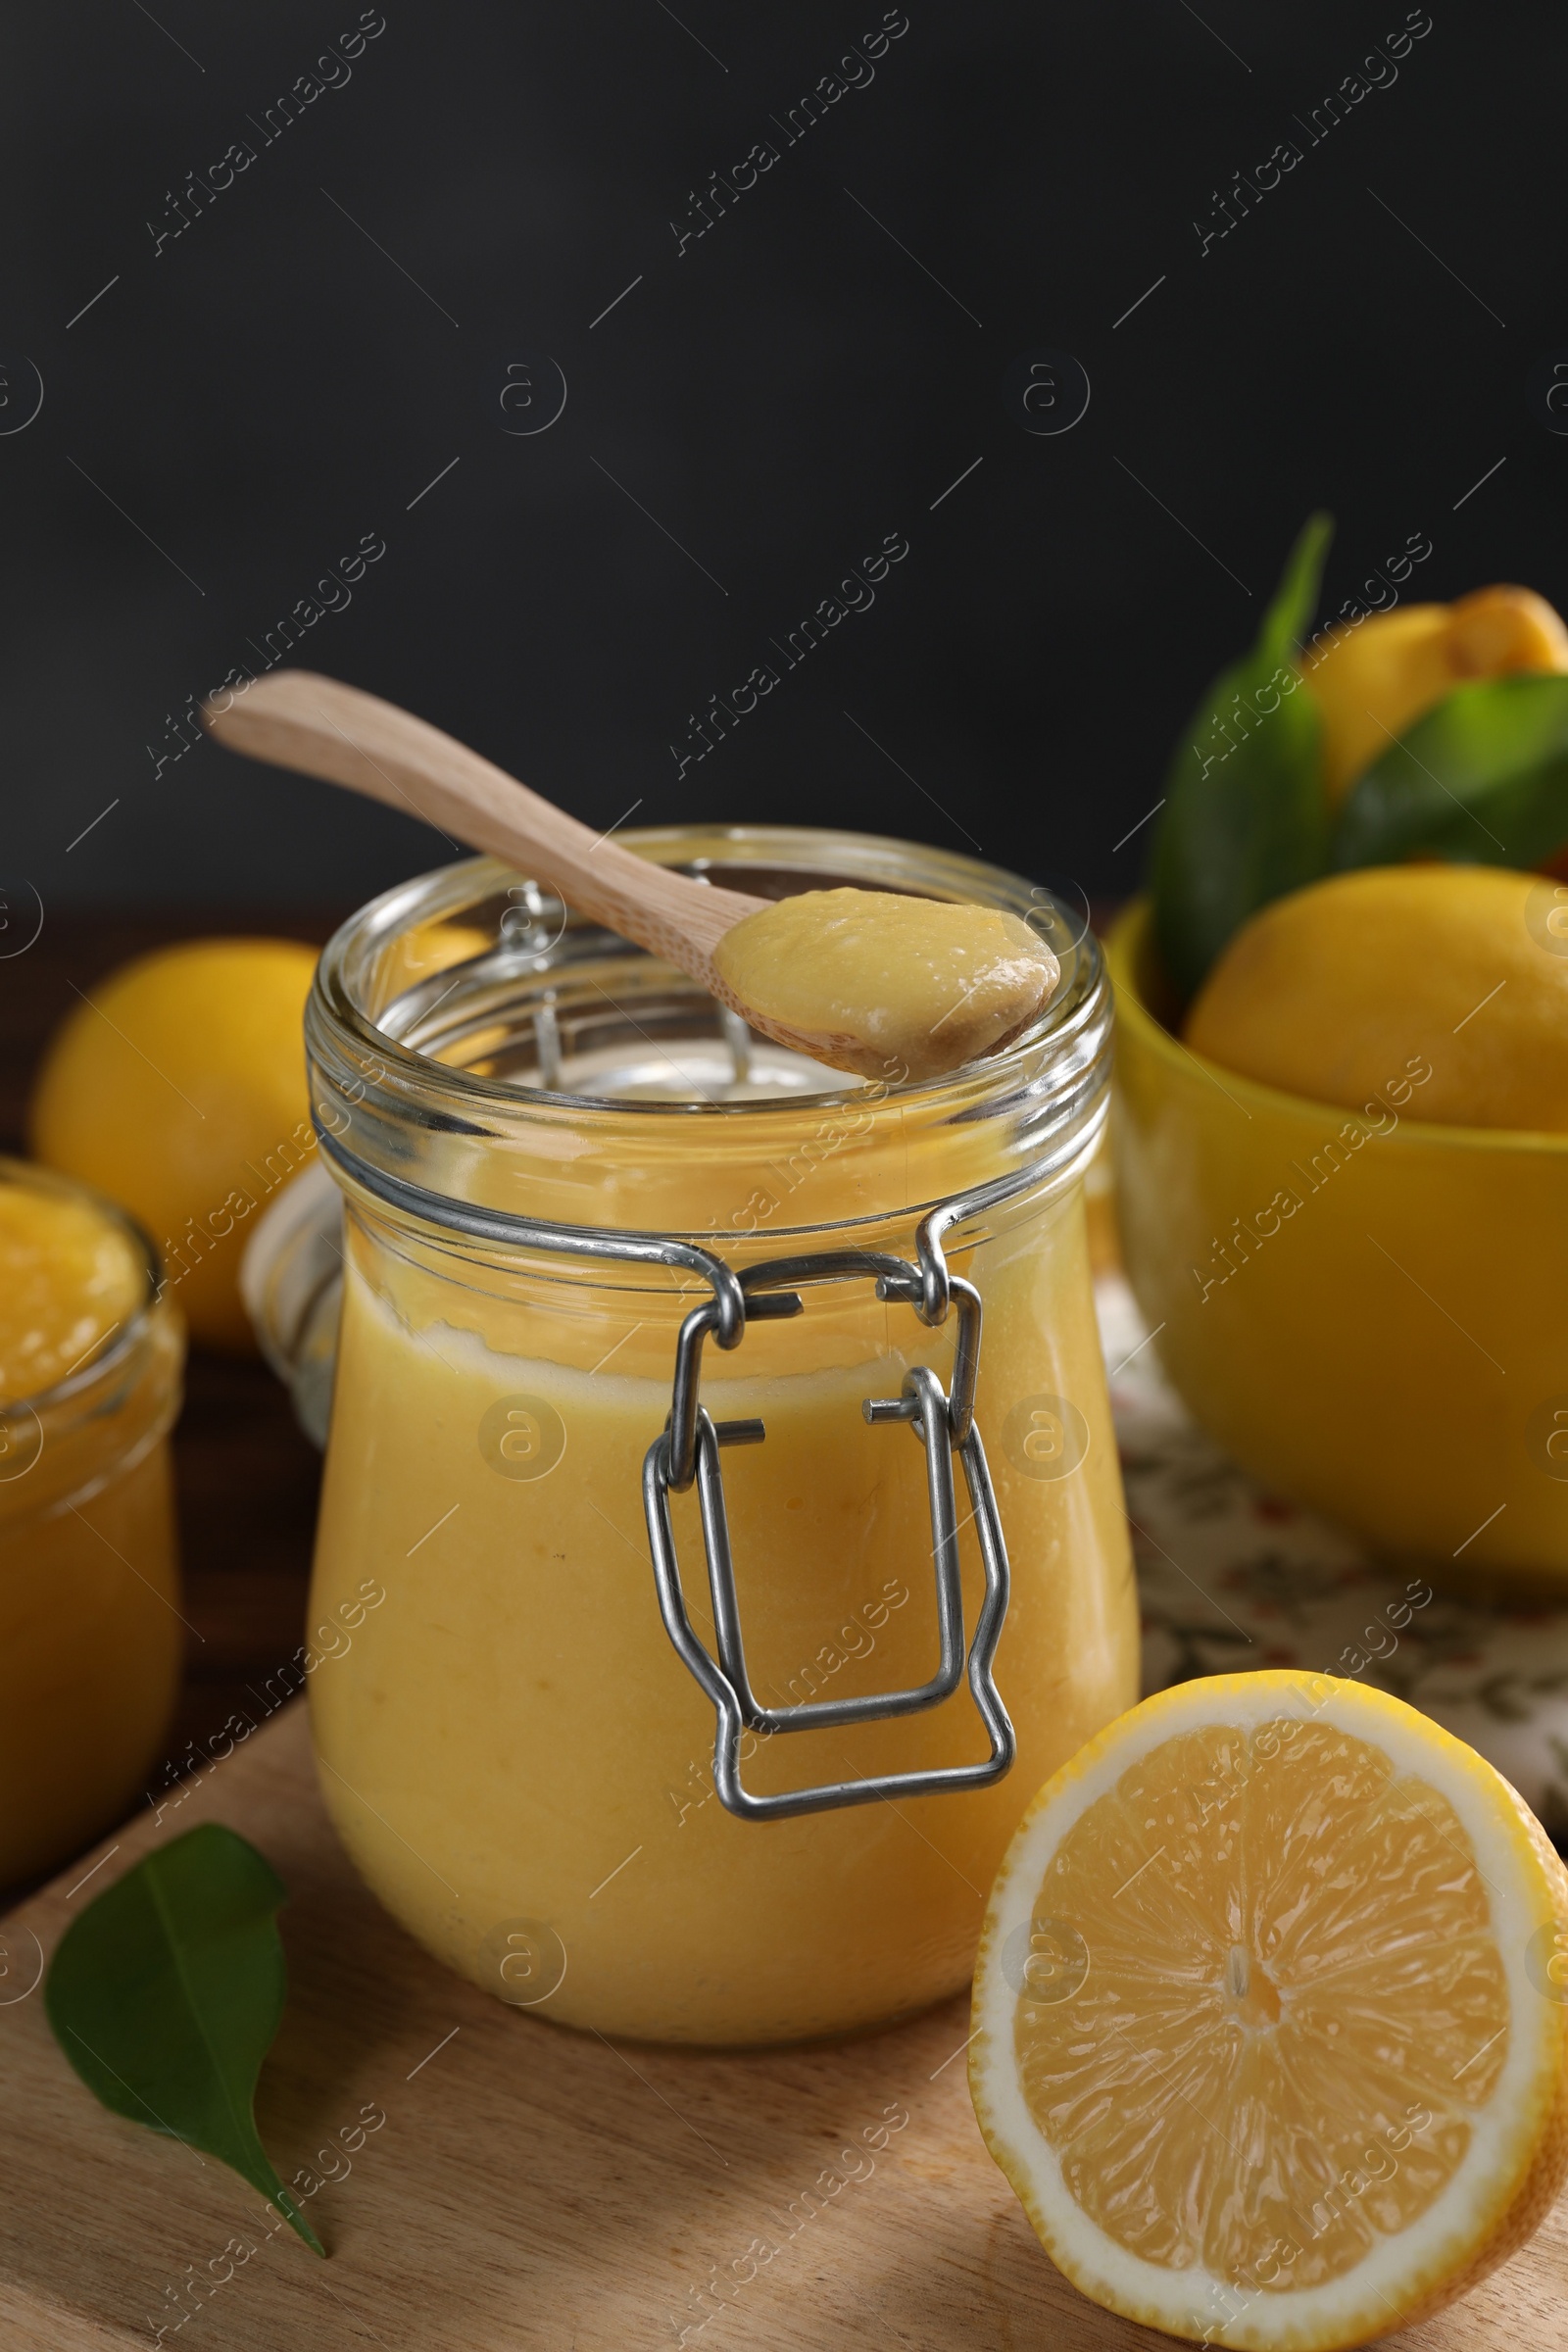 Photo of Delicious lemon curd in glass jar, spoon, fresh citrus fruits and green leaves on table